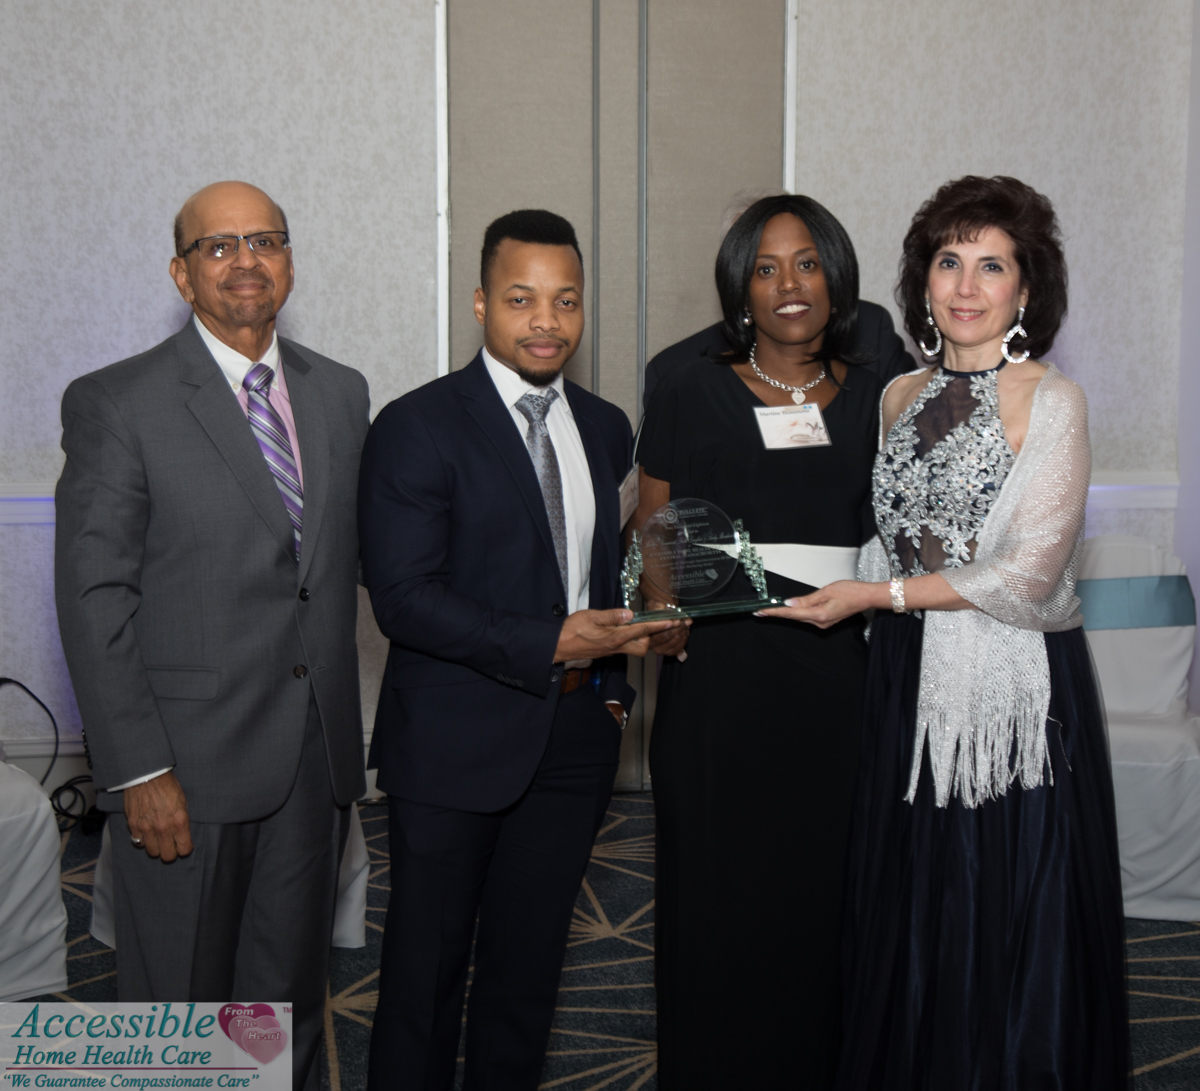 Accessible Home Health Care Awards Banquet, 2018, Health Care, Photographed by Tracey Ahrendt